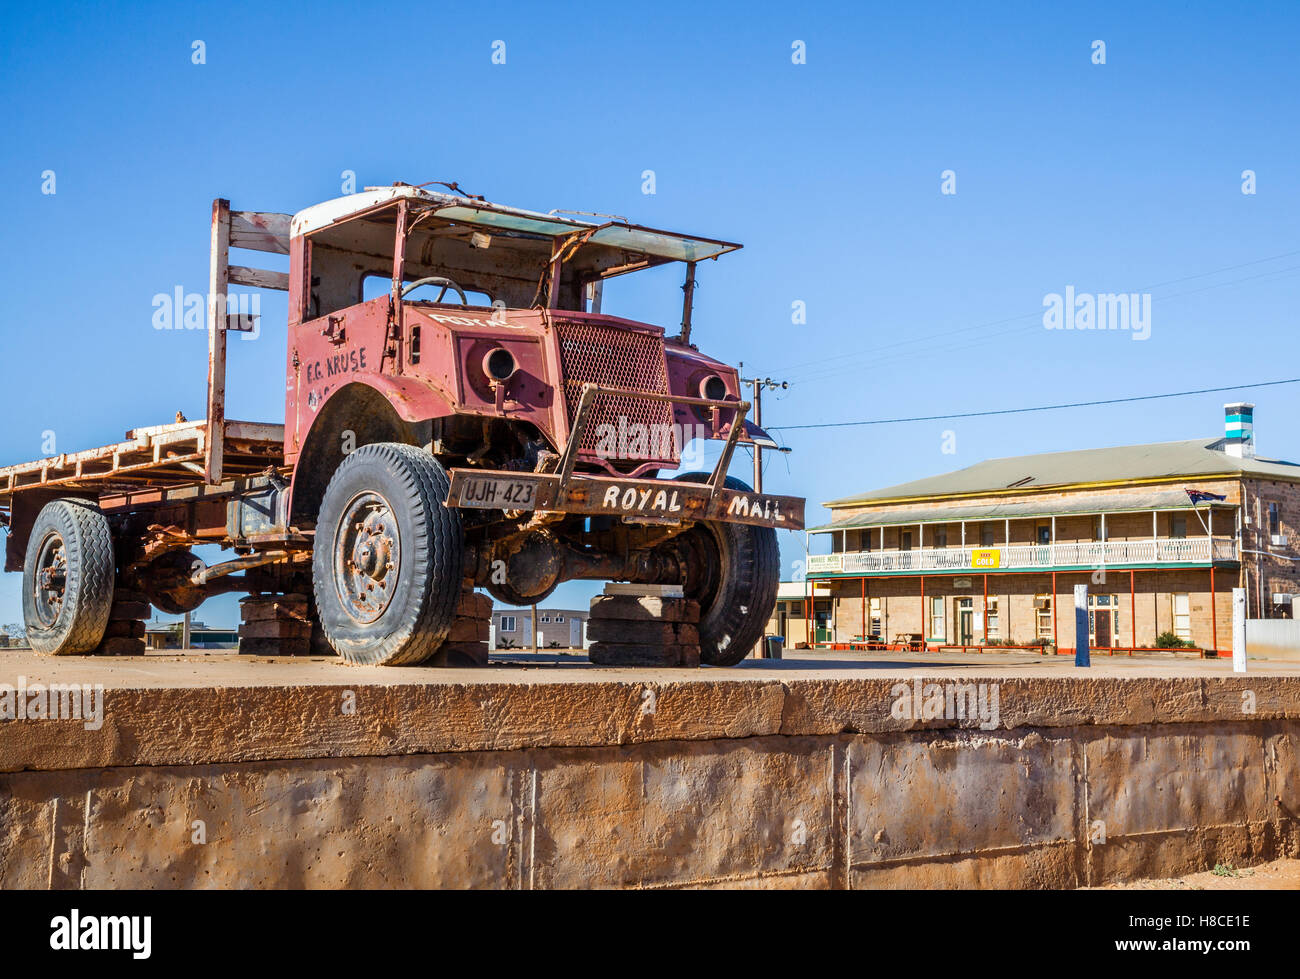 Marree in South Australia, Marree Hotel, vintage 1940s Chevrolet Blitz truck as it was used on outback mail runs Stock Photo